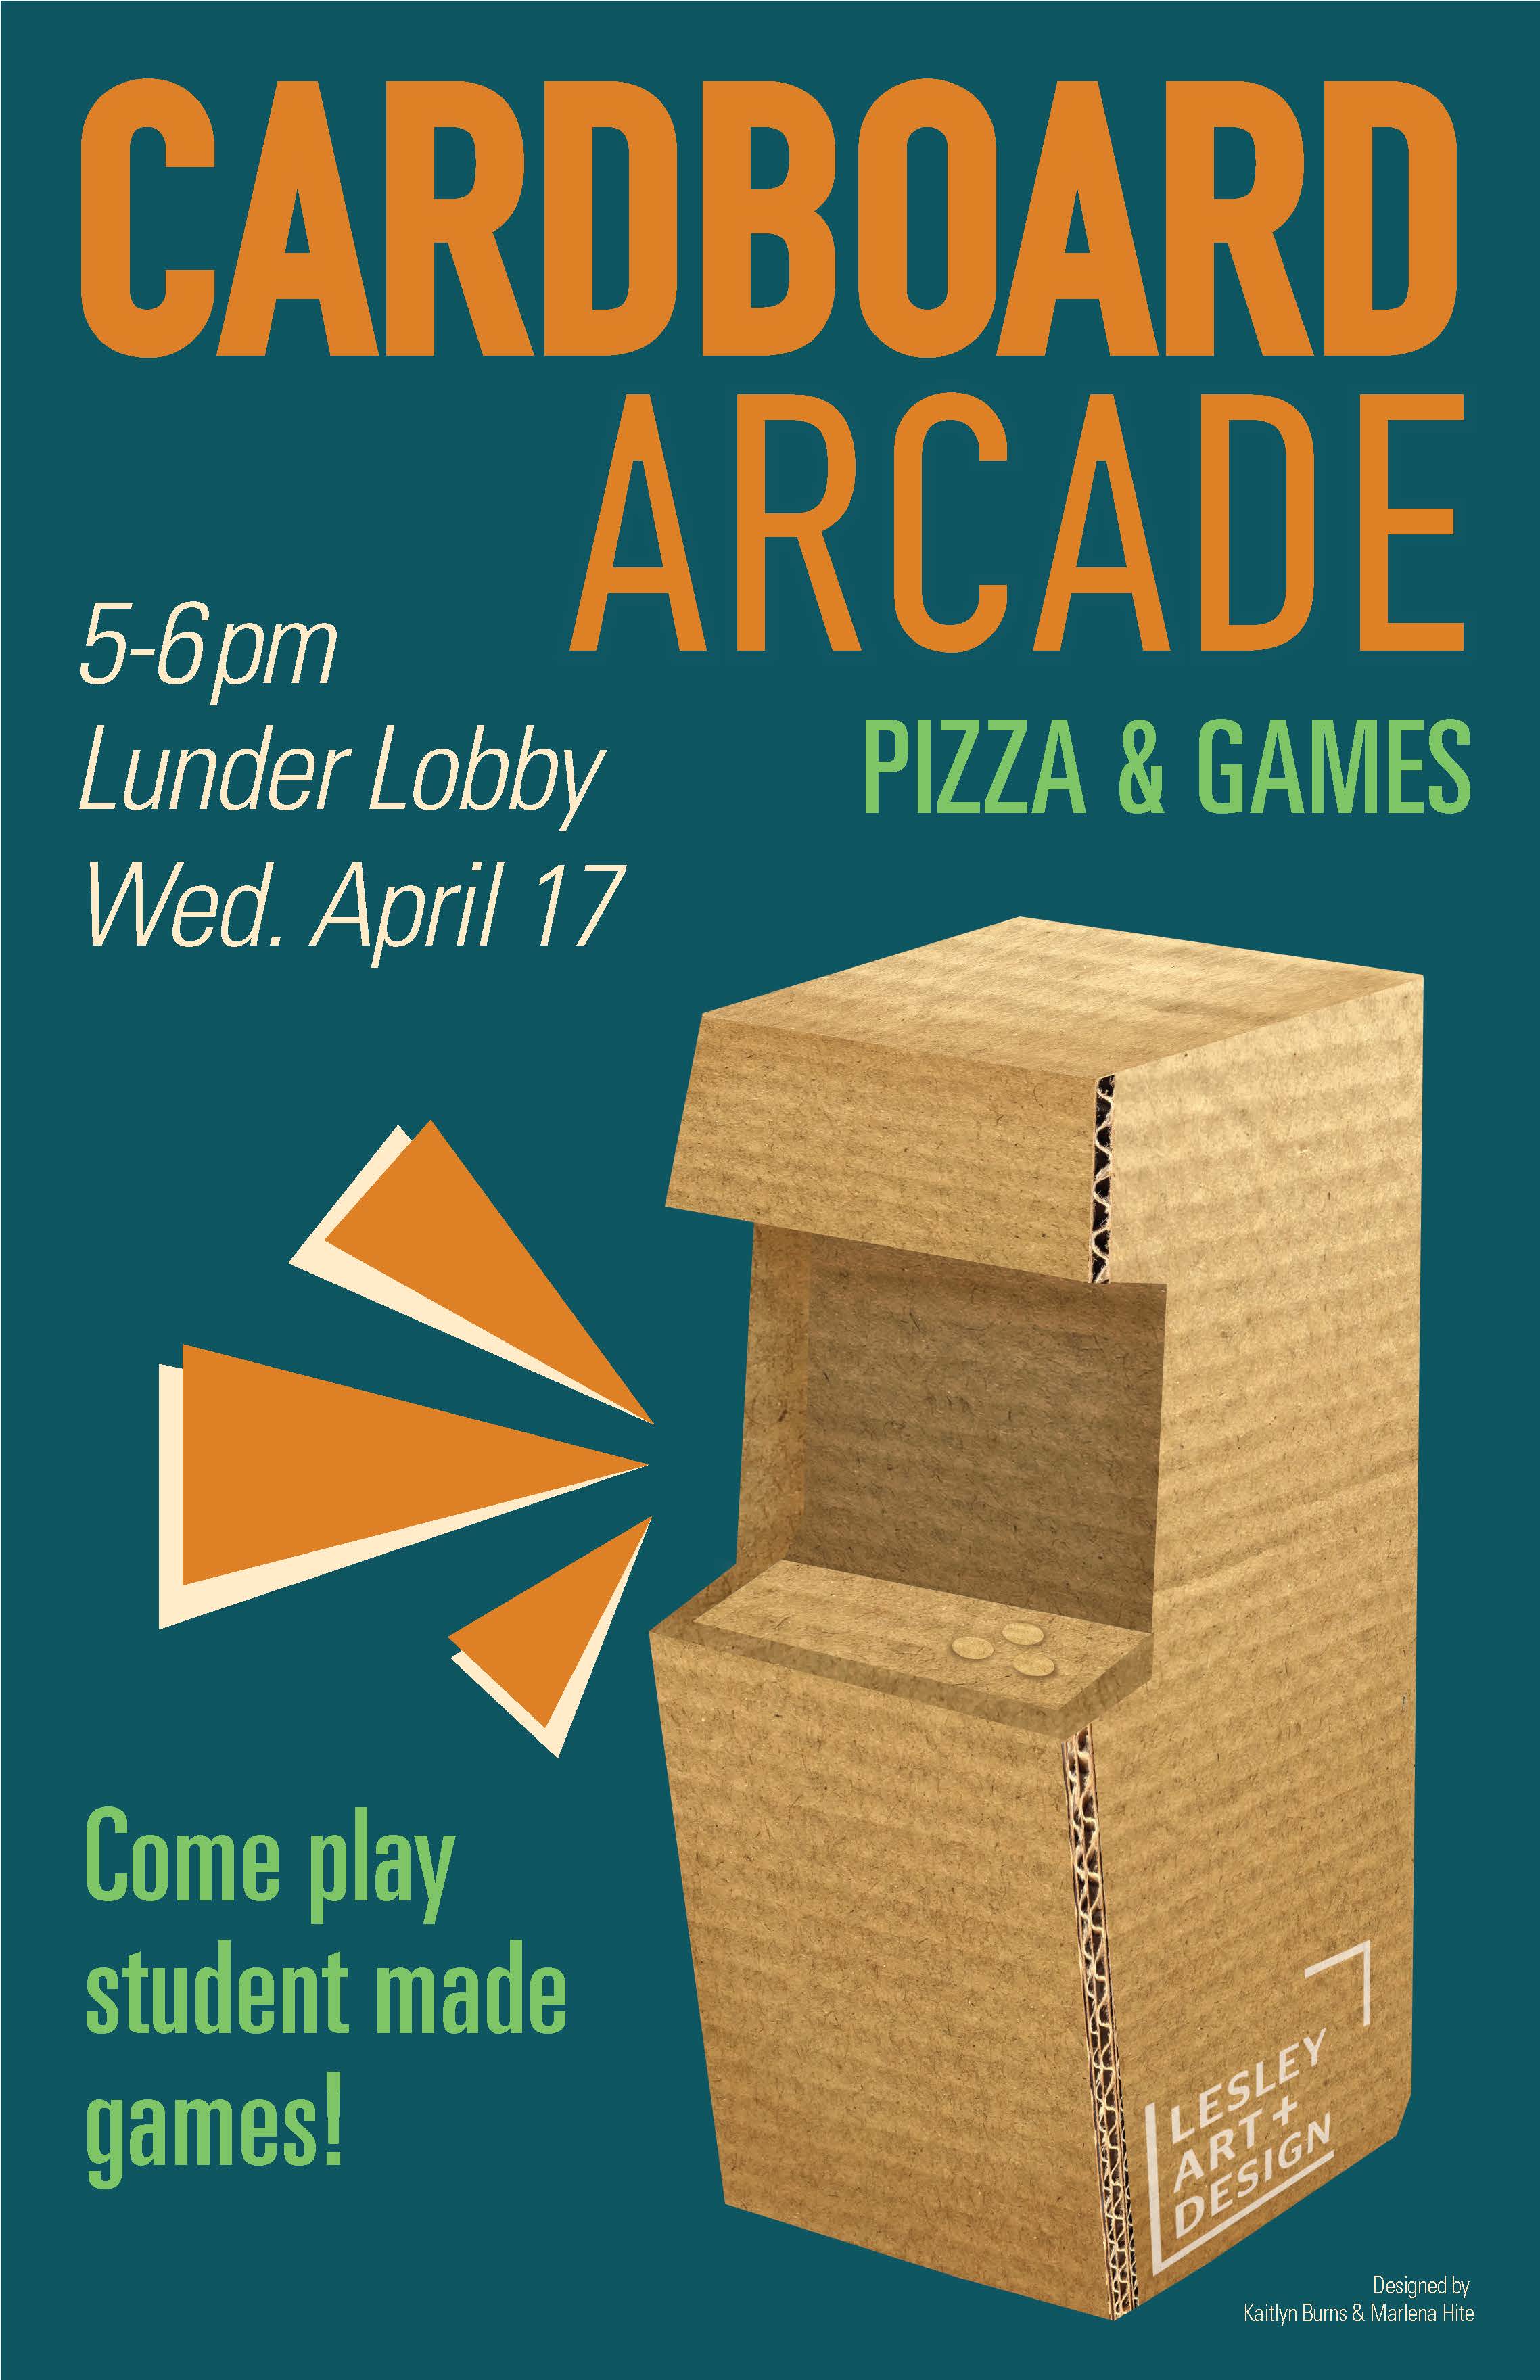 The words "Cardboard Arcade" in bright orange on a dark teal background. An image of an arcade game made of cardboard sits beneath it.